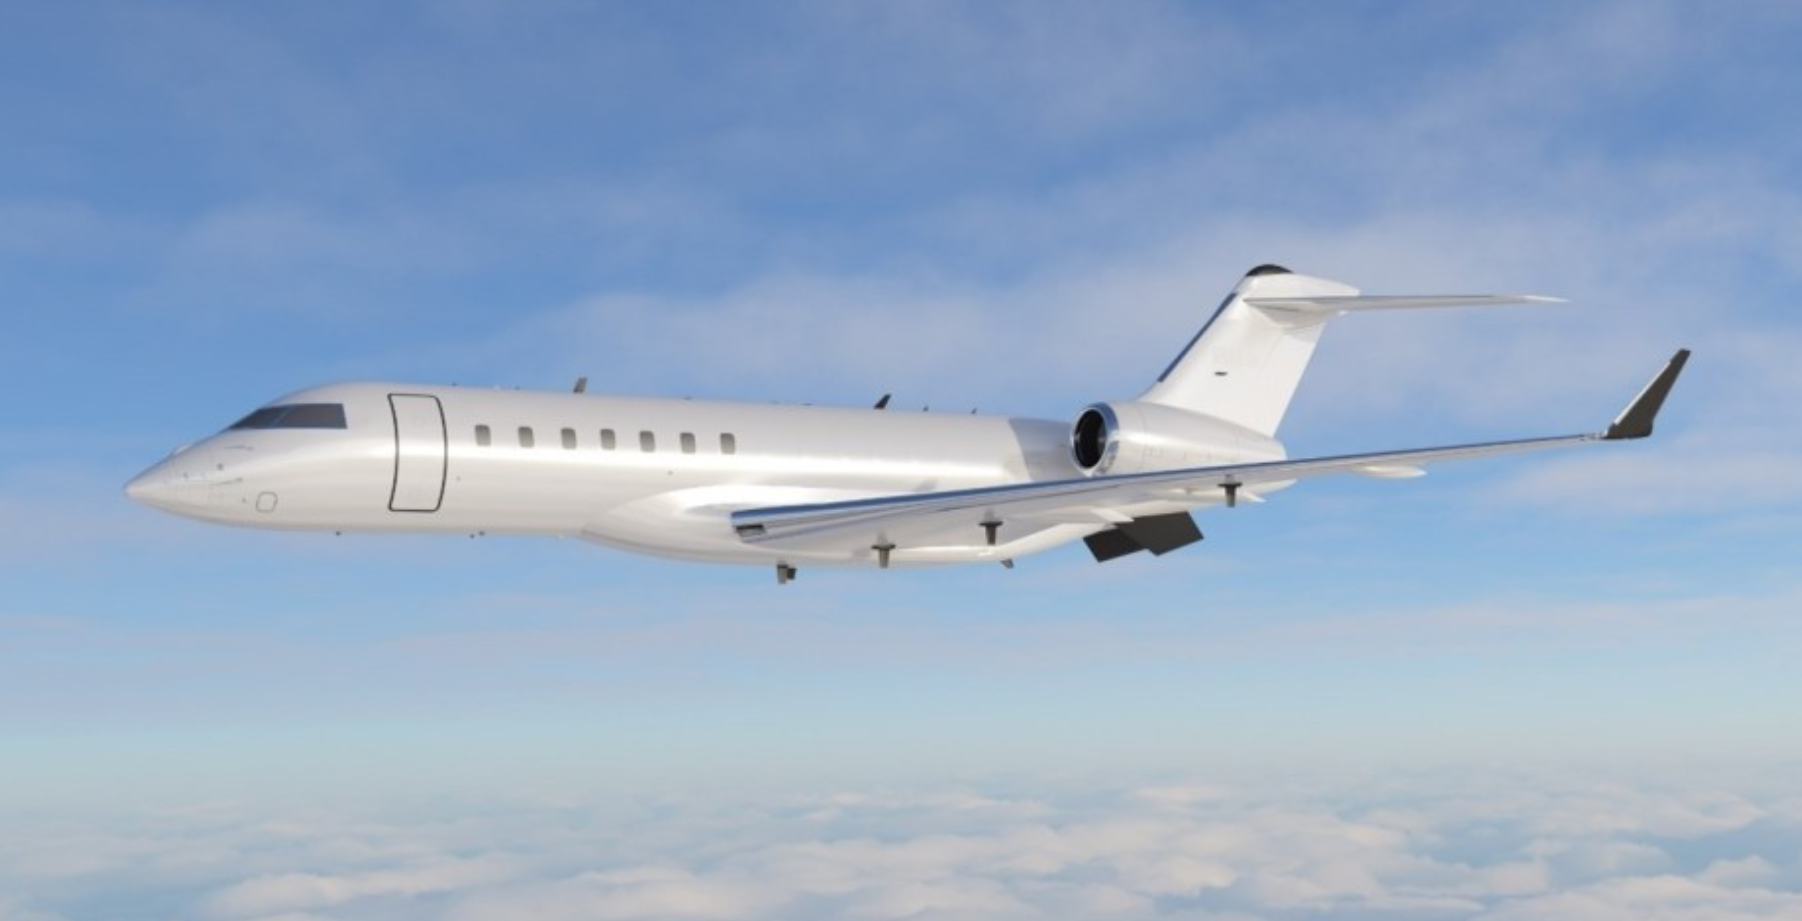 A white Bombardier Global 6500 airplane is seen flying among the clouds. The blue sky serves as the background.